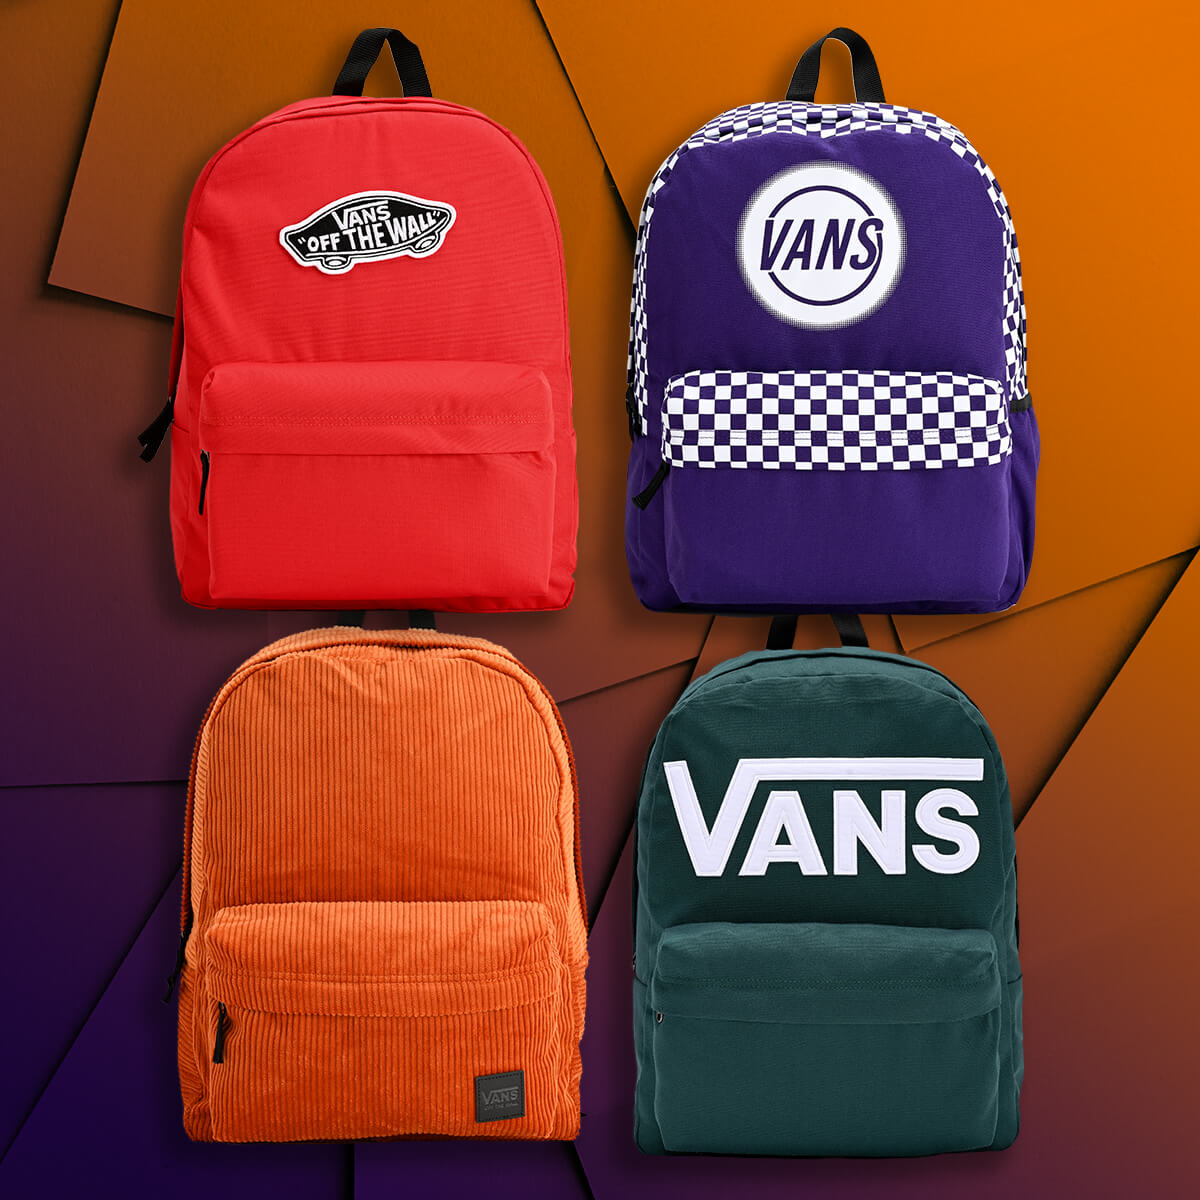 VANS ACCESSORIES - BACKPACKS, SHOULDER BAGS AND MORE - SHOP NOW